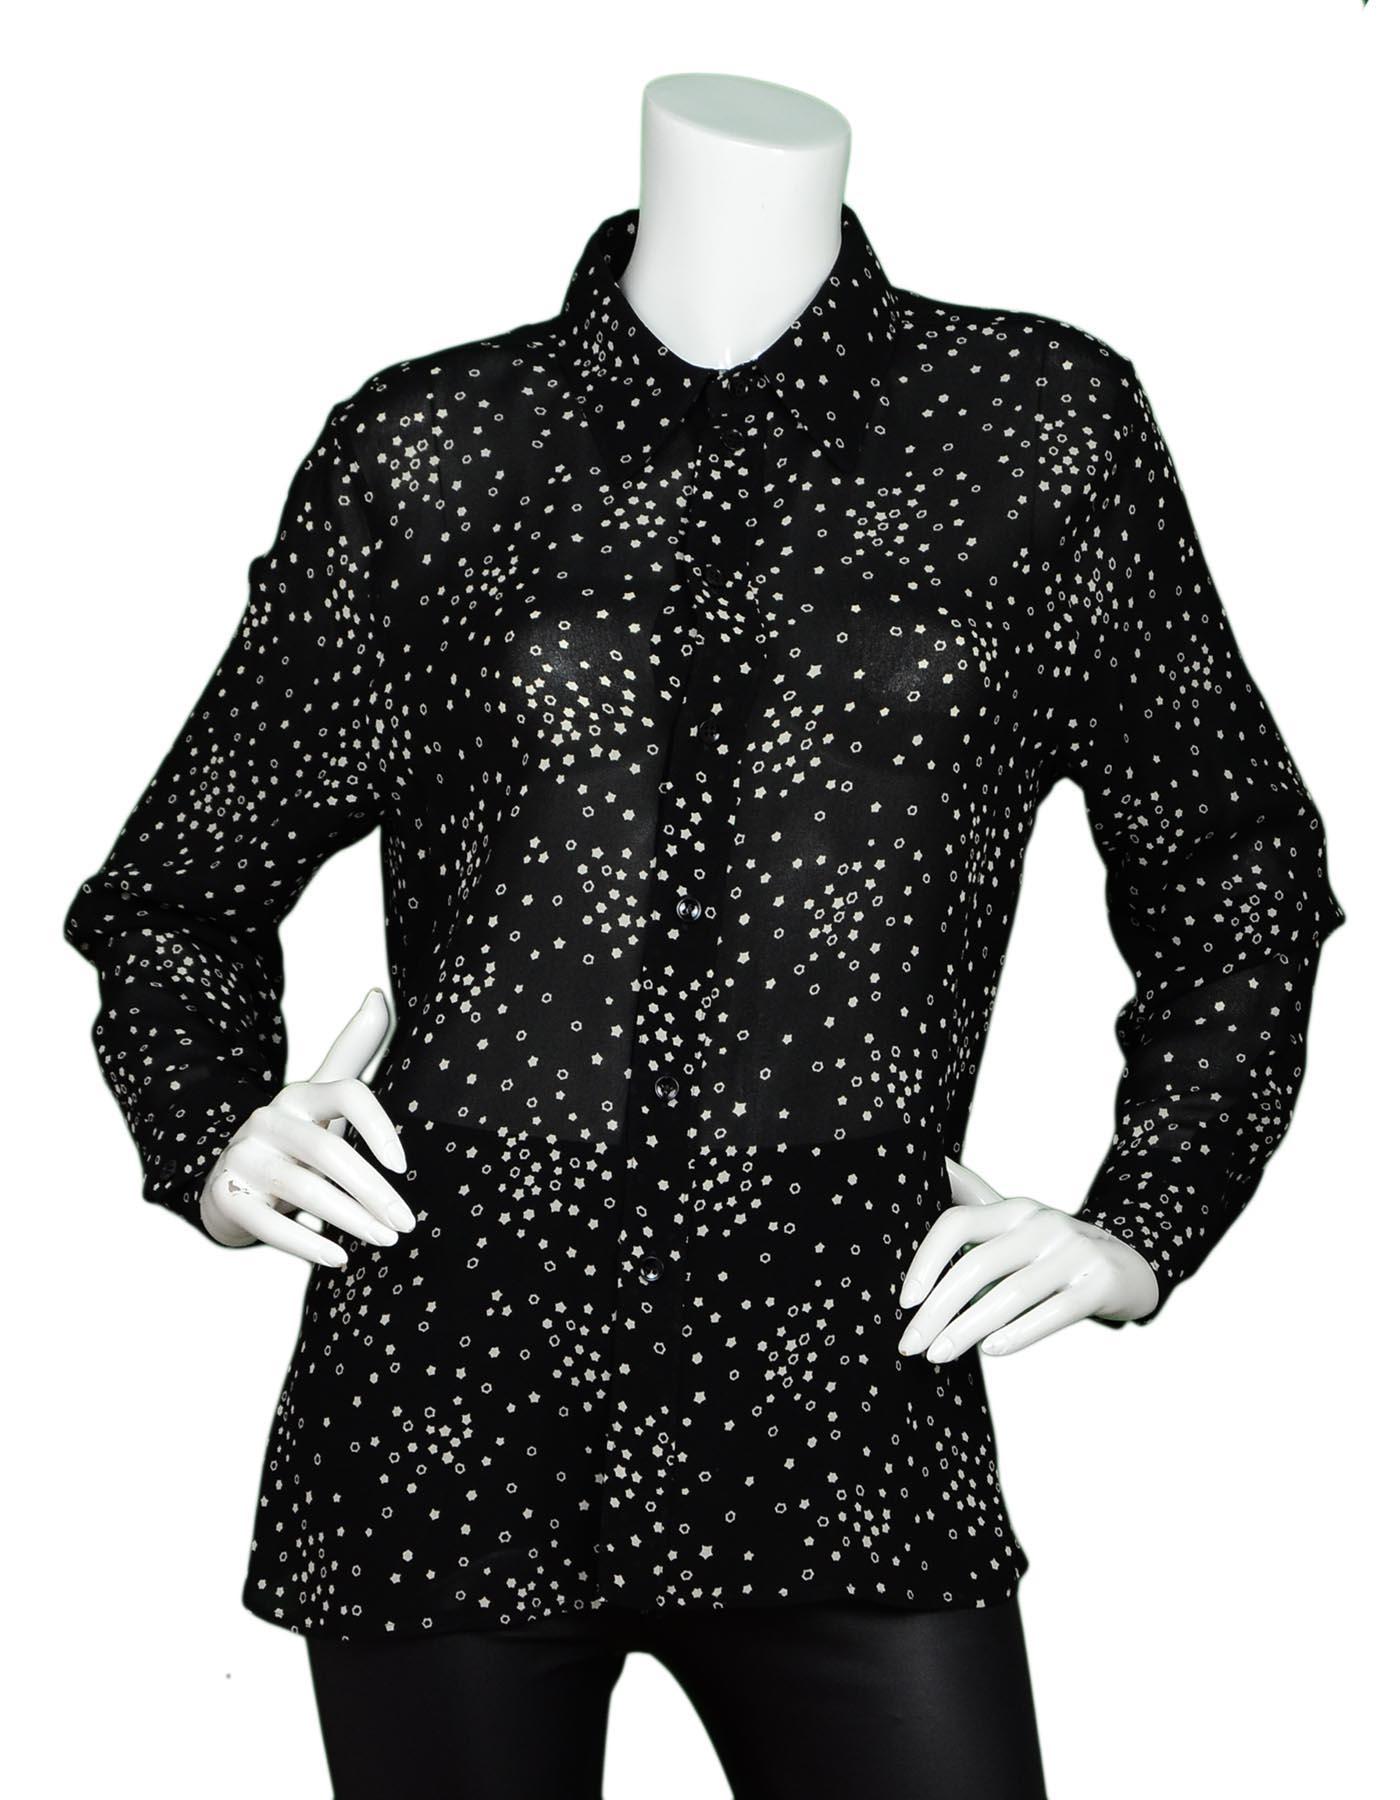 Saint Laurent Black/White Star Print Blouse Sz F 46

Made In:  Italy
Color: Black, white
Materials: 100% viscose 
Opening/Closure: Button down front
Overall Condition: Excellent pre-owned condition 

Measurements: 
Shoulder To Shoulder: 16.25